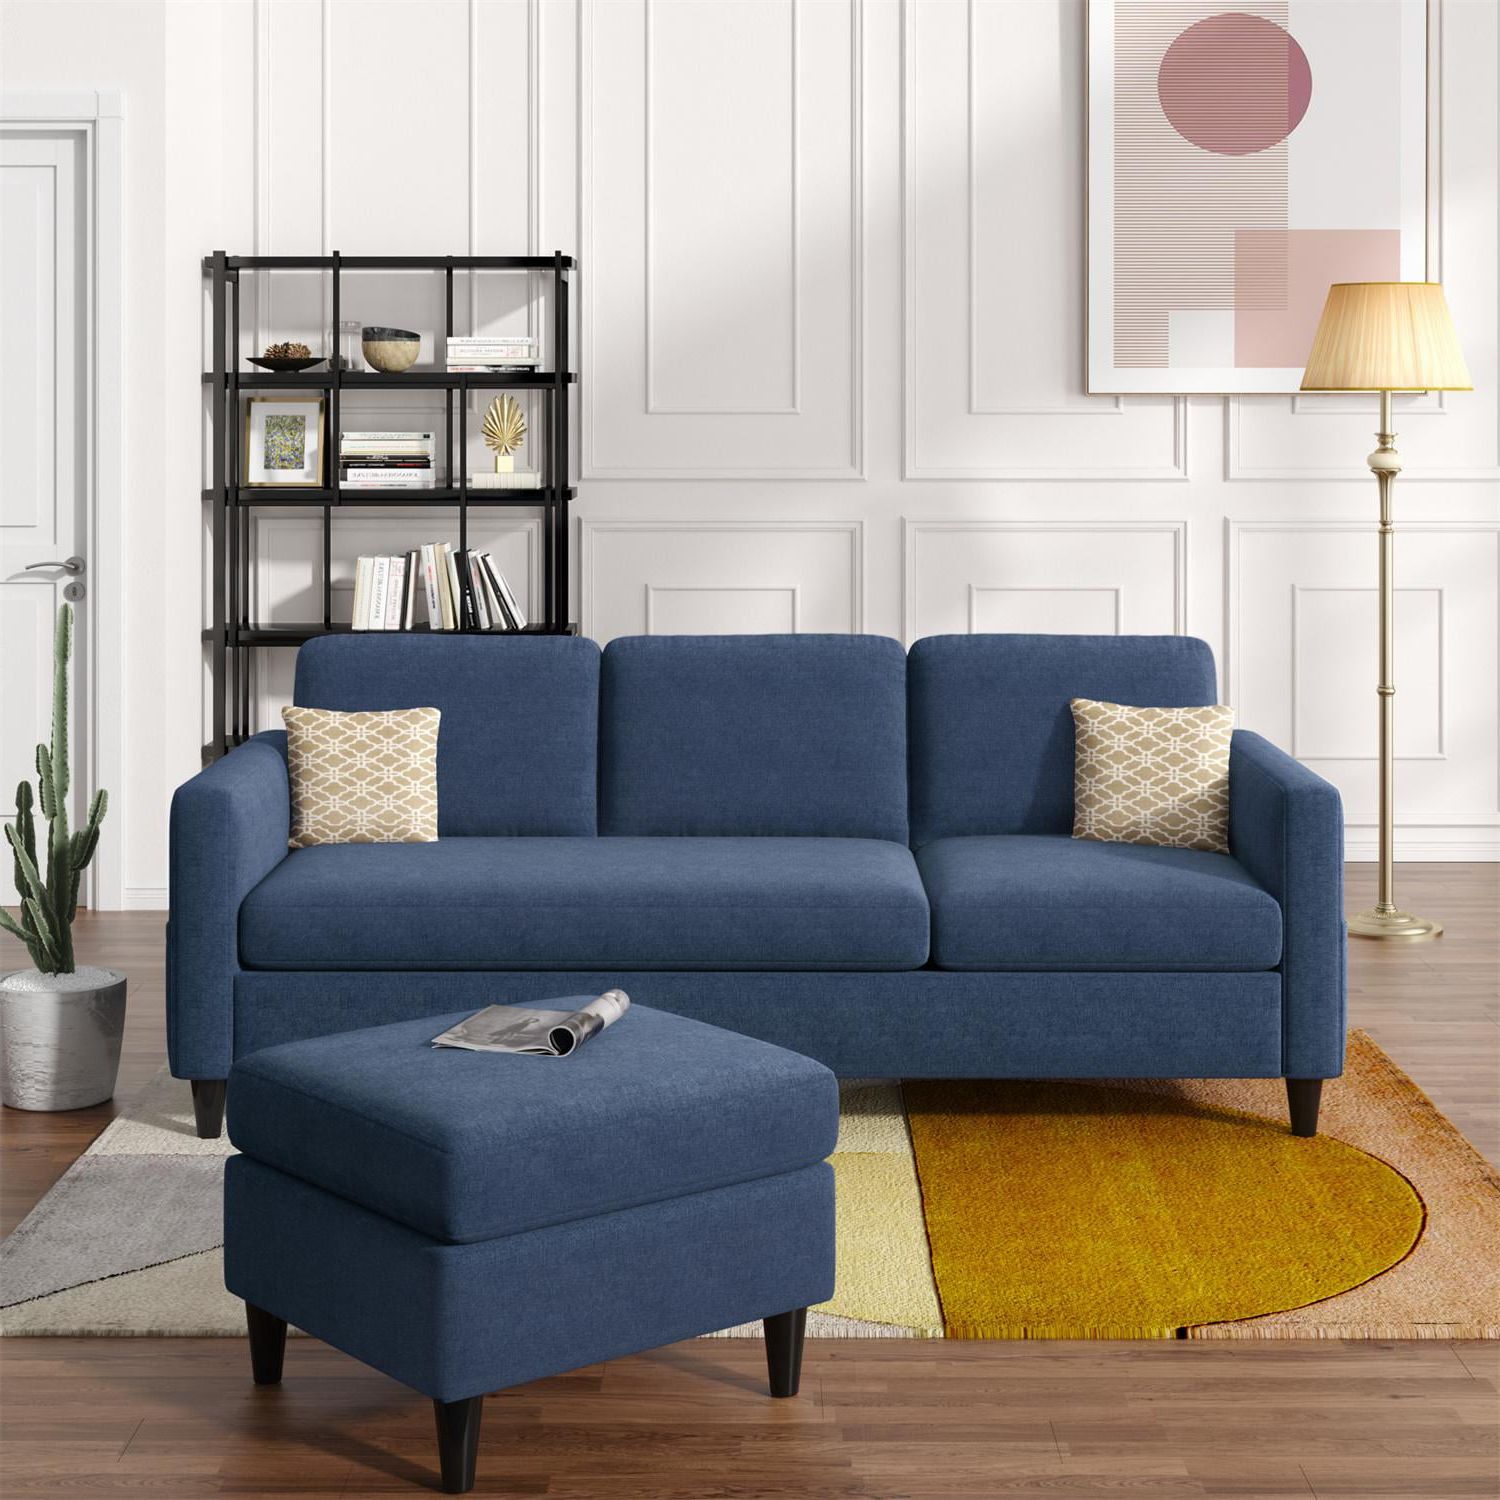 Reversible Sectional Sofa With Ottoman, Linen Fabric Upholstered L Shape 3 Seater  Couch Sofa Bed With Handy Side Pocket And Armrest For Living Room, Bedroom,  Blue – Walmart Within 3 Seat Sofa Sectionals With Reversible Chaise (Gallery 7 of 20)